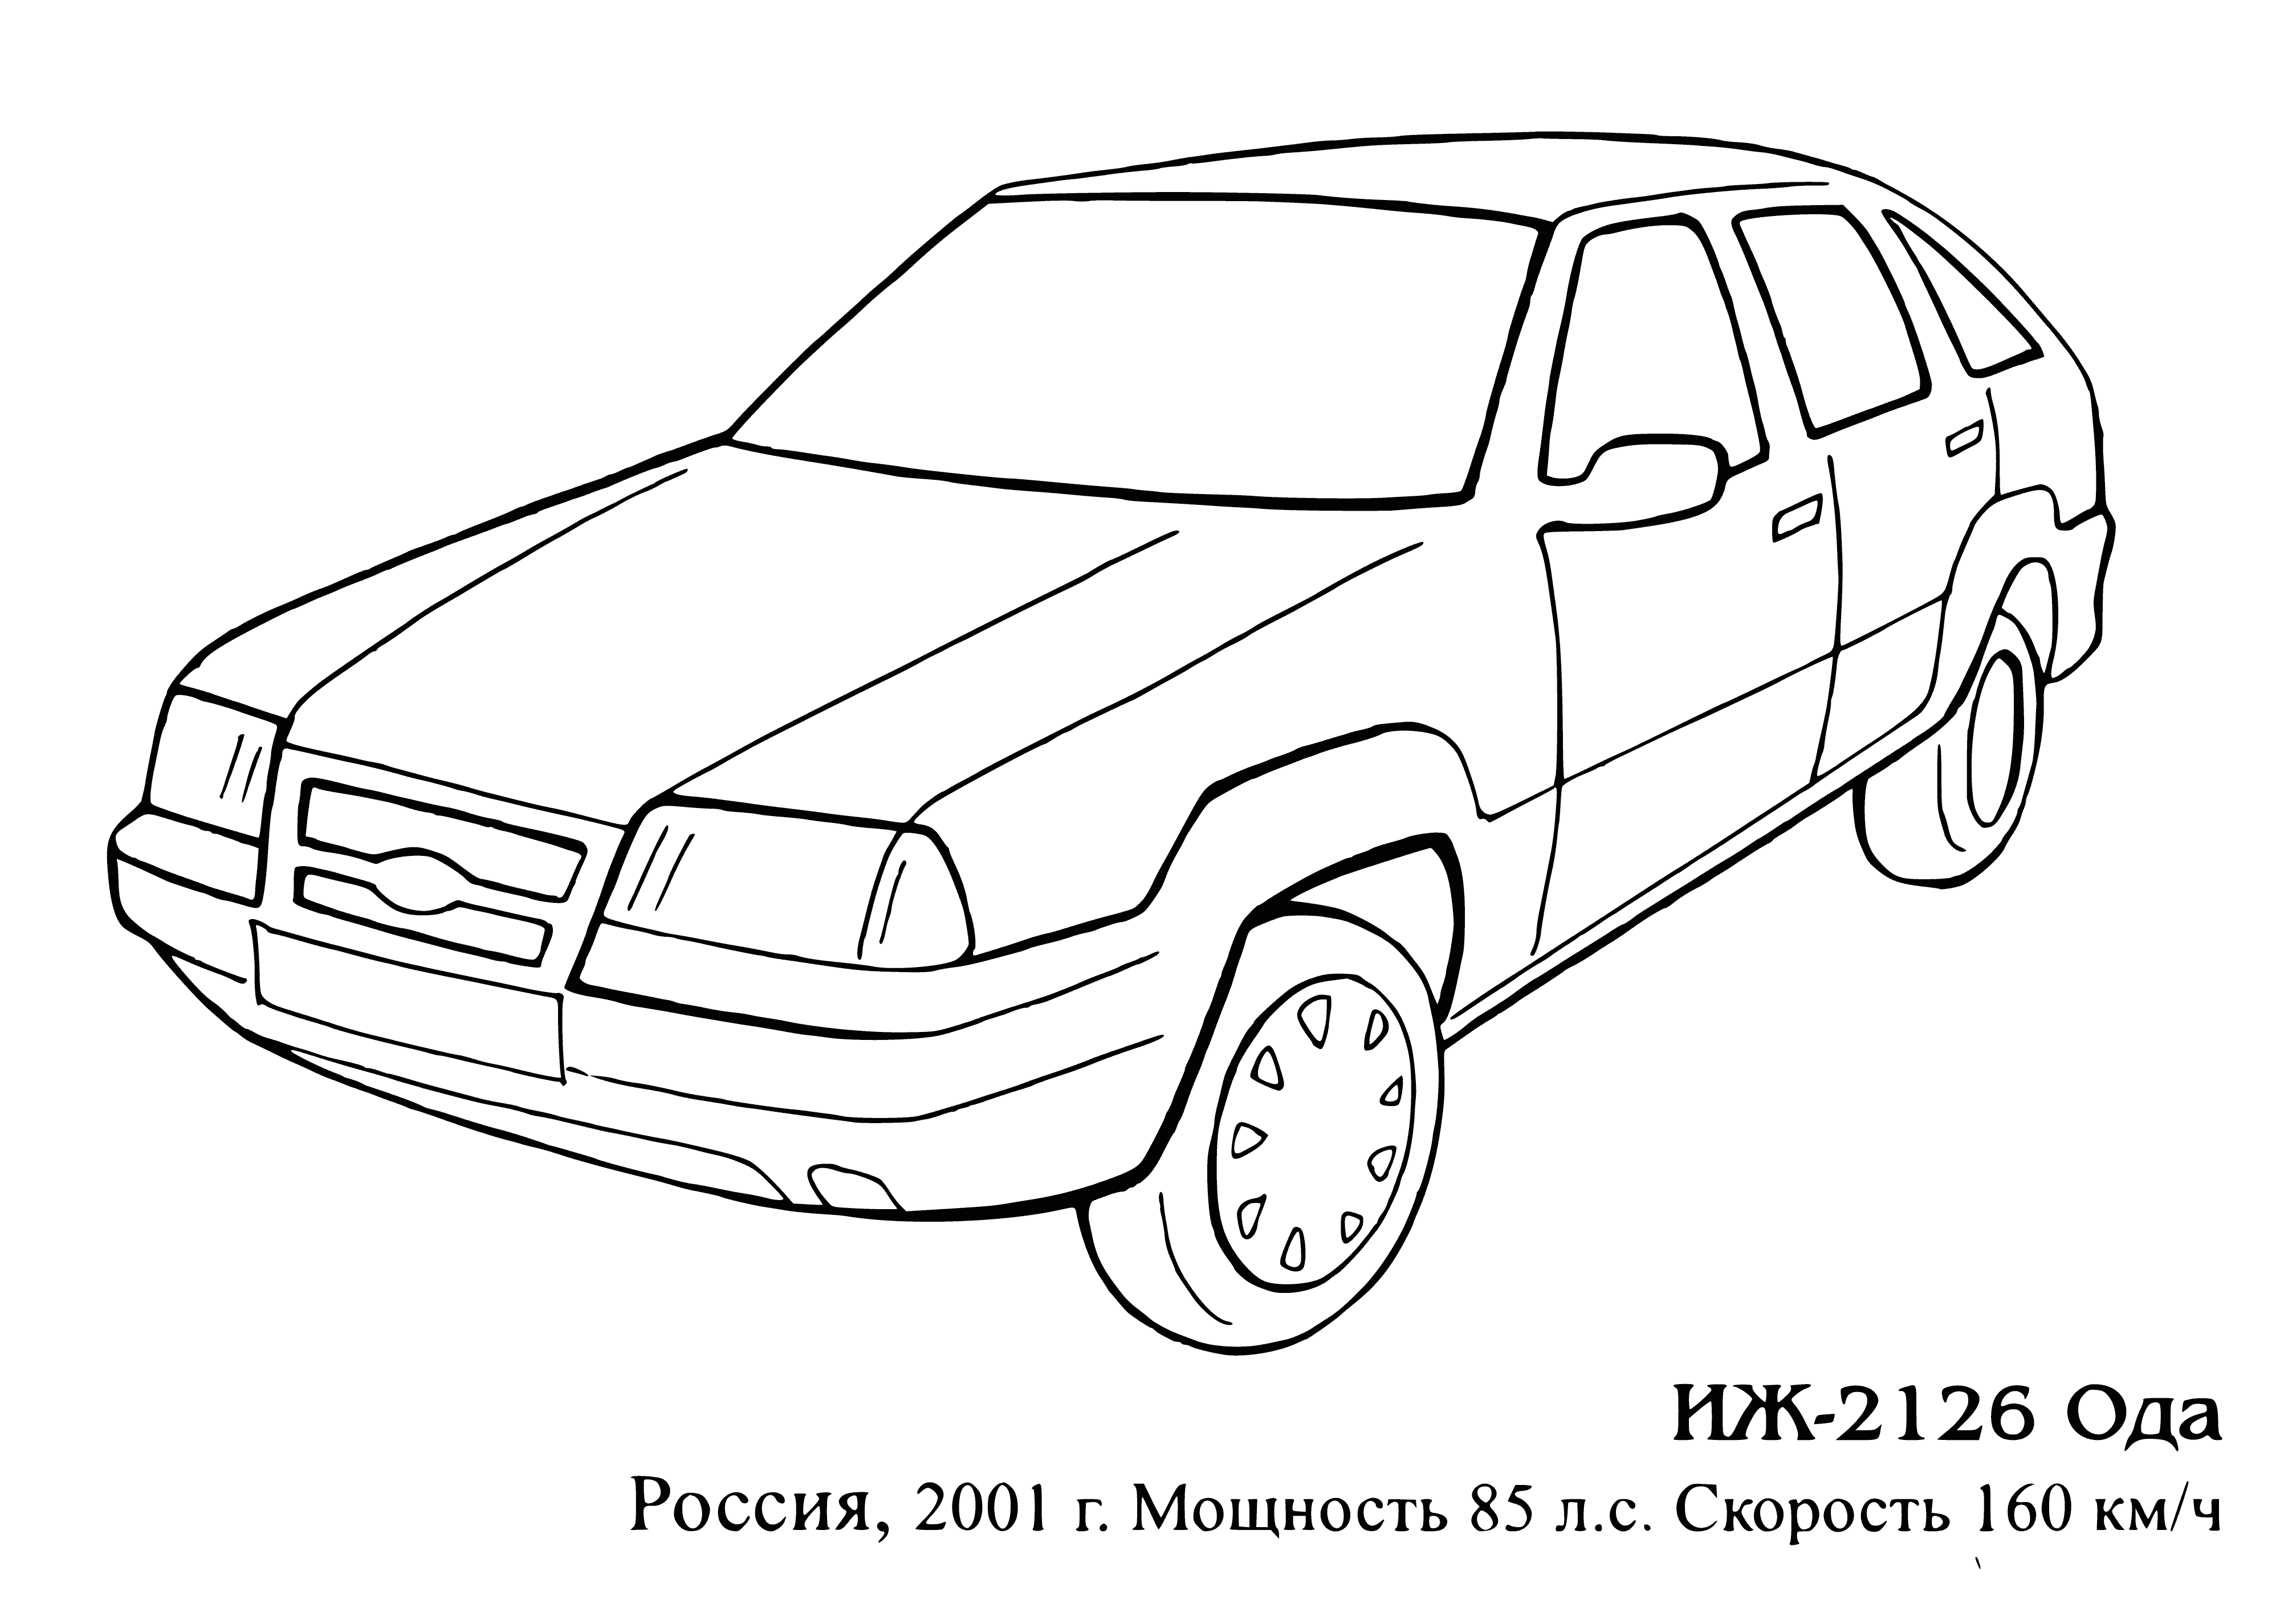 IZH-2126 Oda coloring page